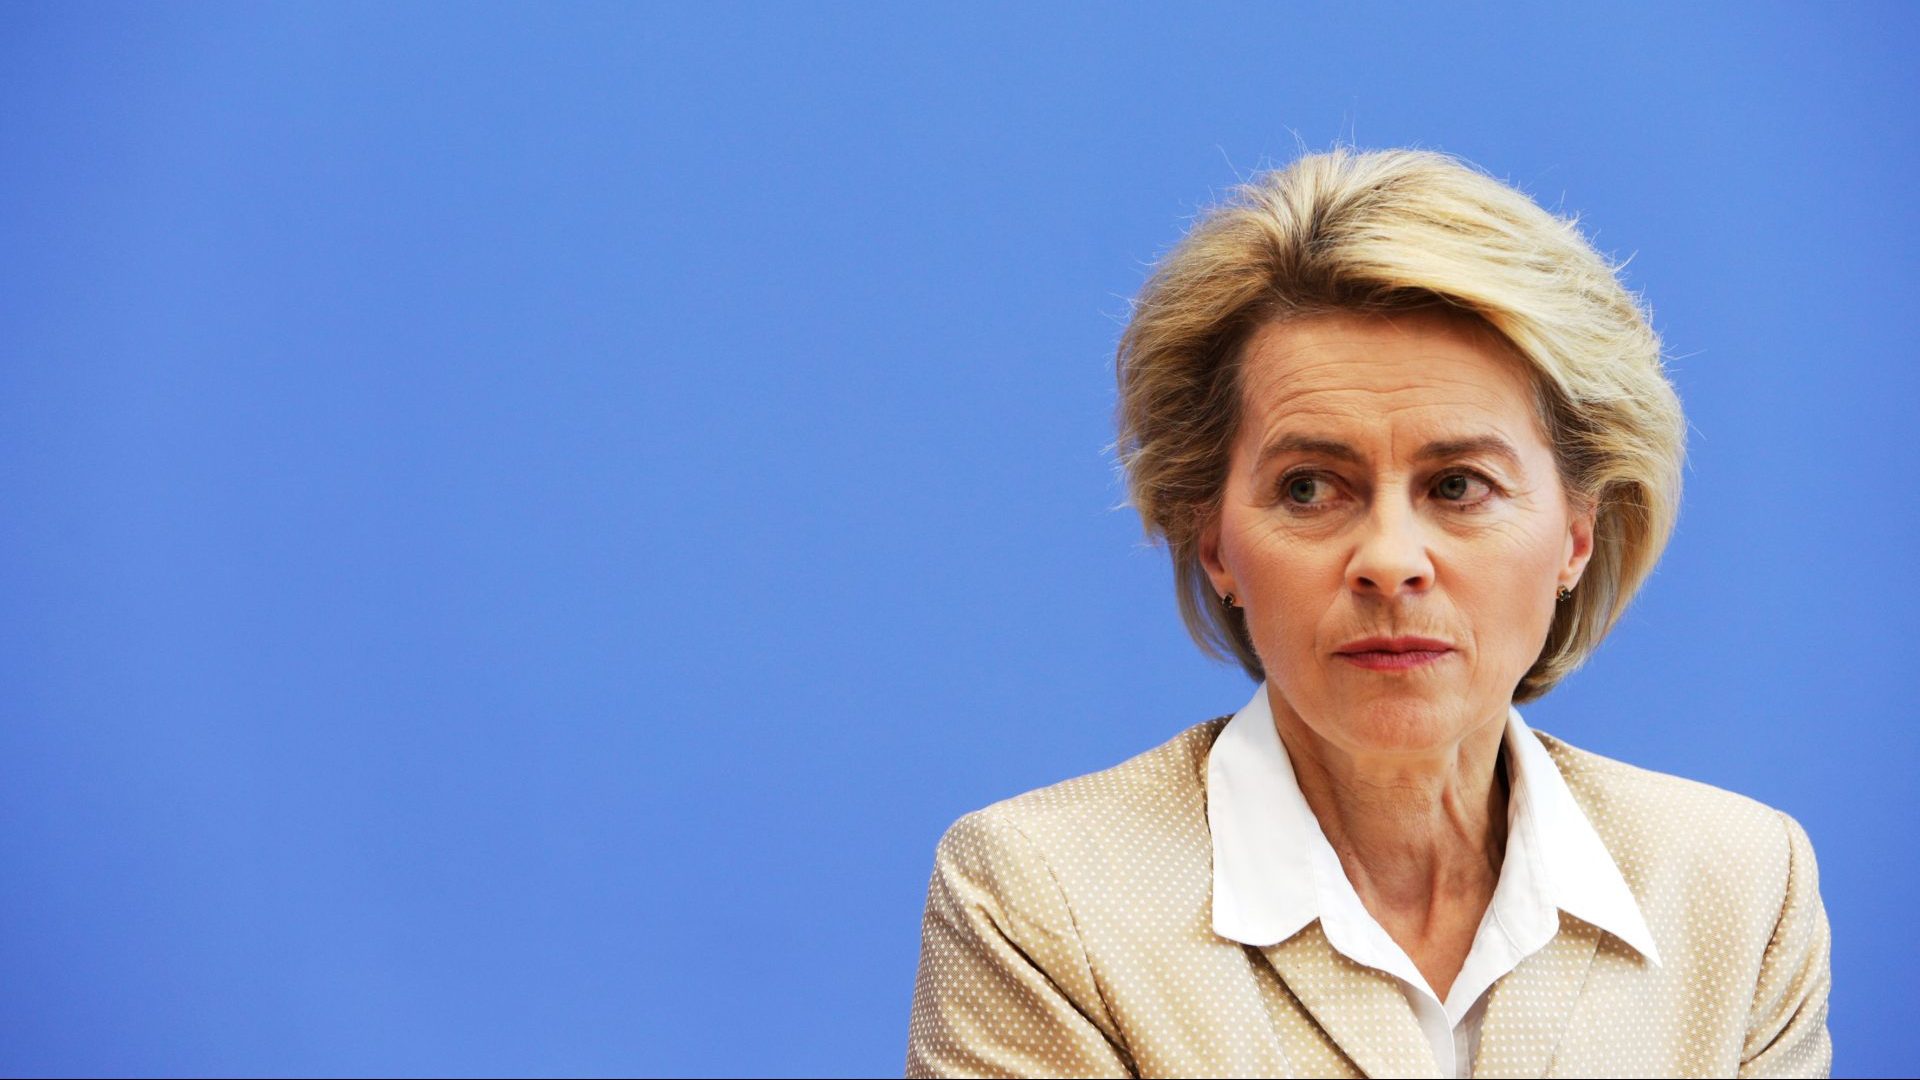 Ursula von der Leyen is playing clever politics, but risks a betrayal of Europe’s promise of social and climate justice. Photo: Schicke/ullstein bild/Getty